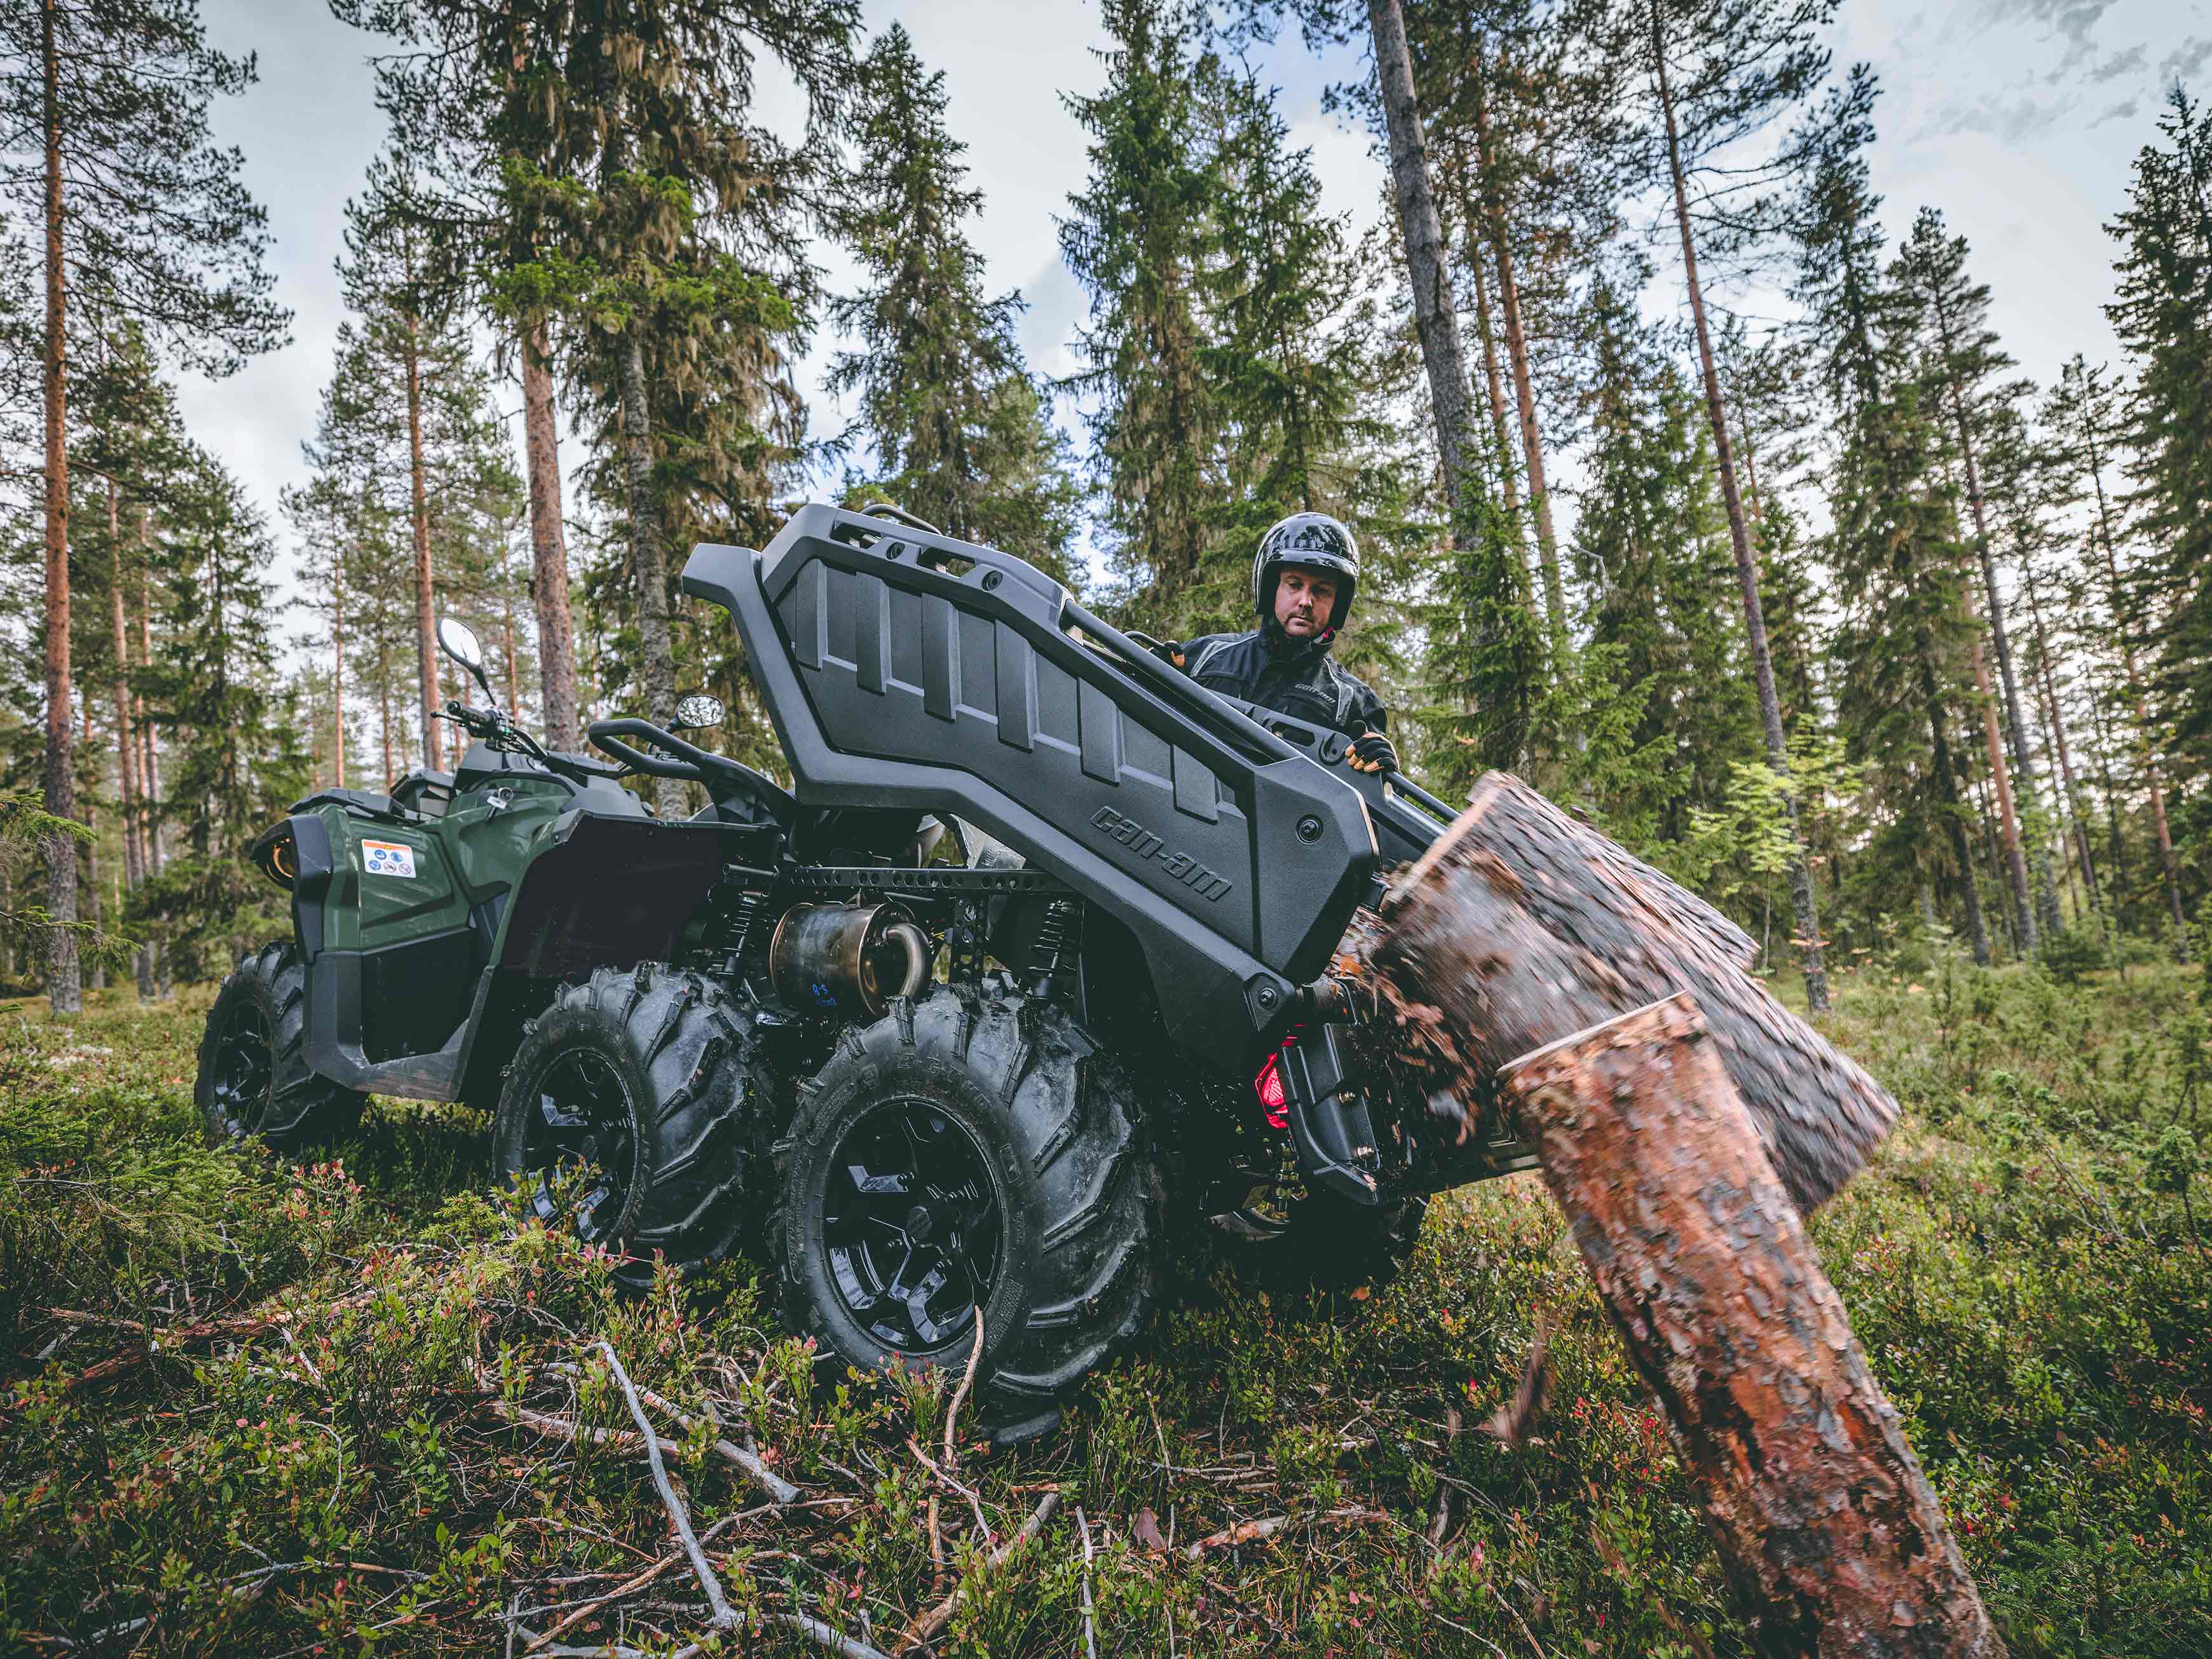 A Can-Am Outlander PRO XU holding a chainsaw in the dedicated slot, equipped with a LinQ Jerry can and bumpers